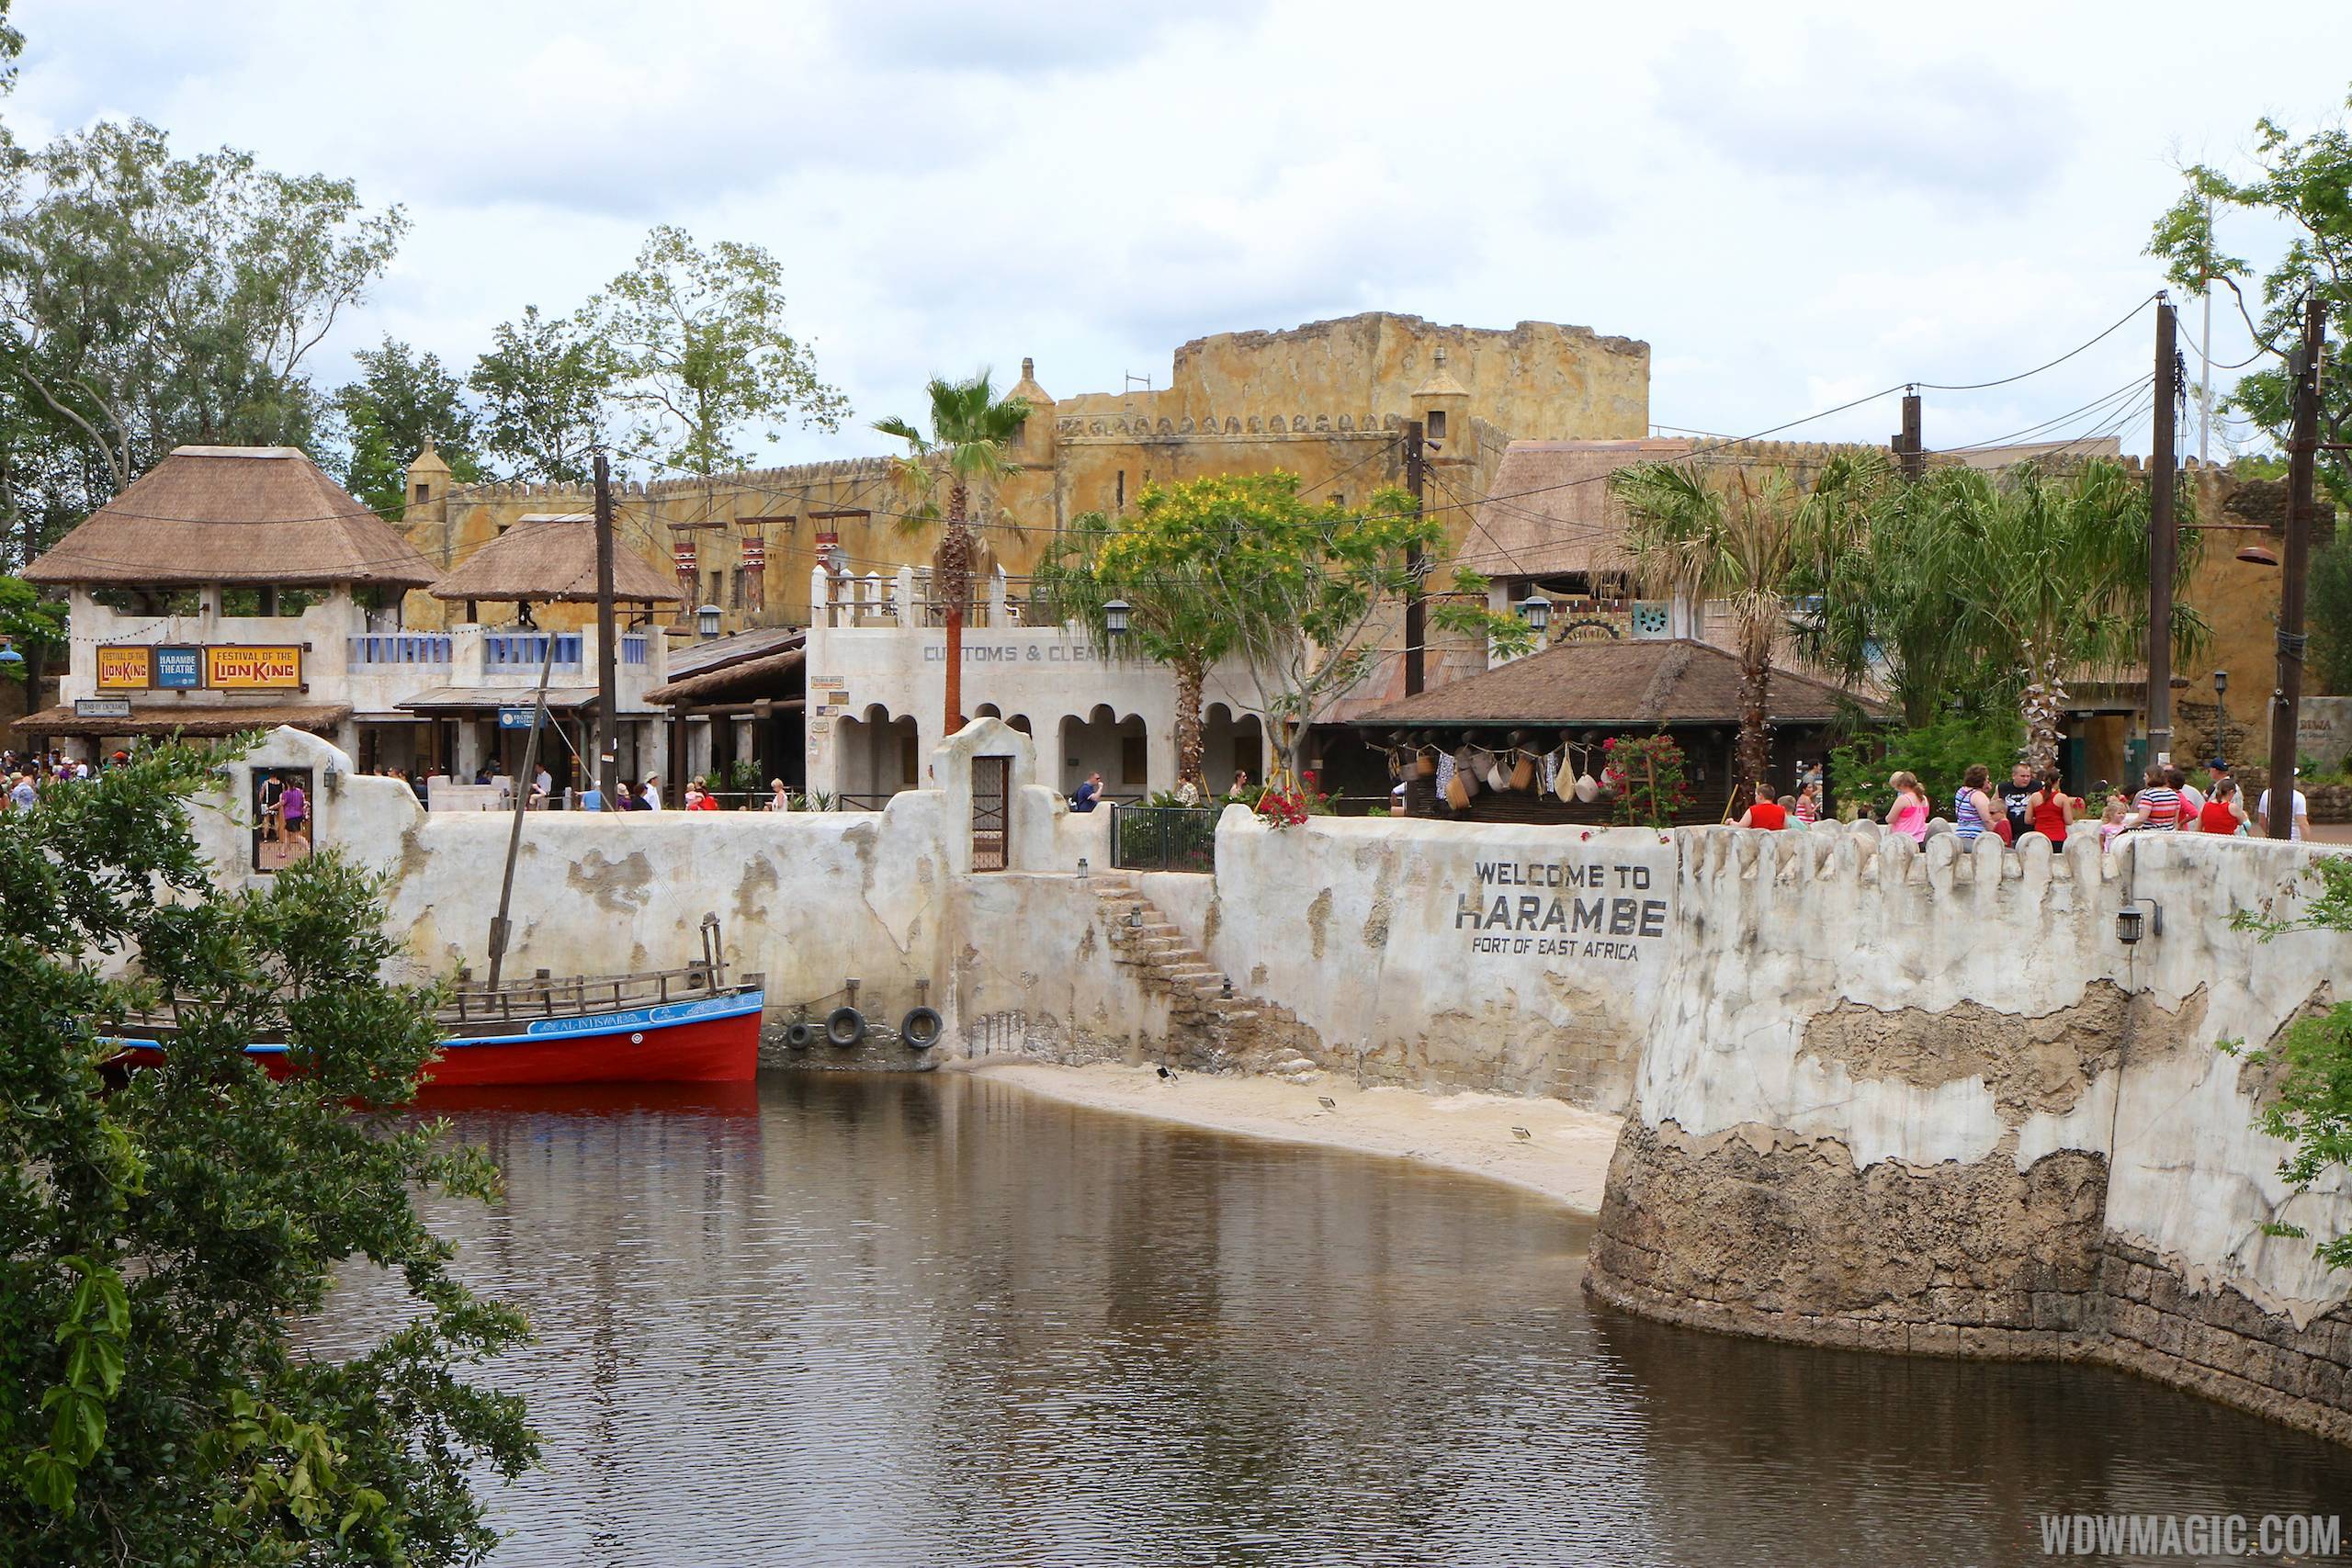 PHOTOS and VIDEO - Take a walkthrough of the new Harambe Theatre area at Disney's Animal Kingdom